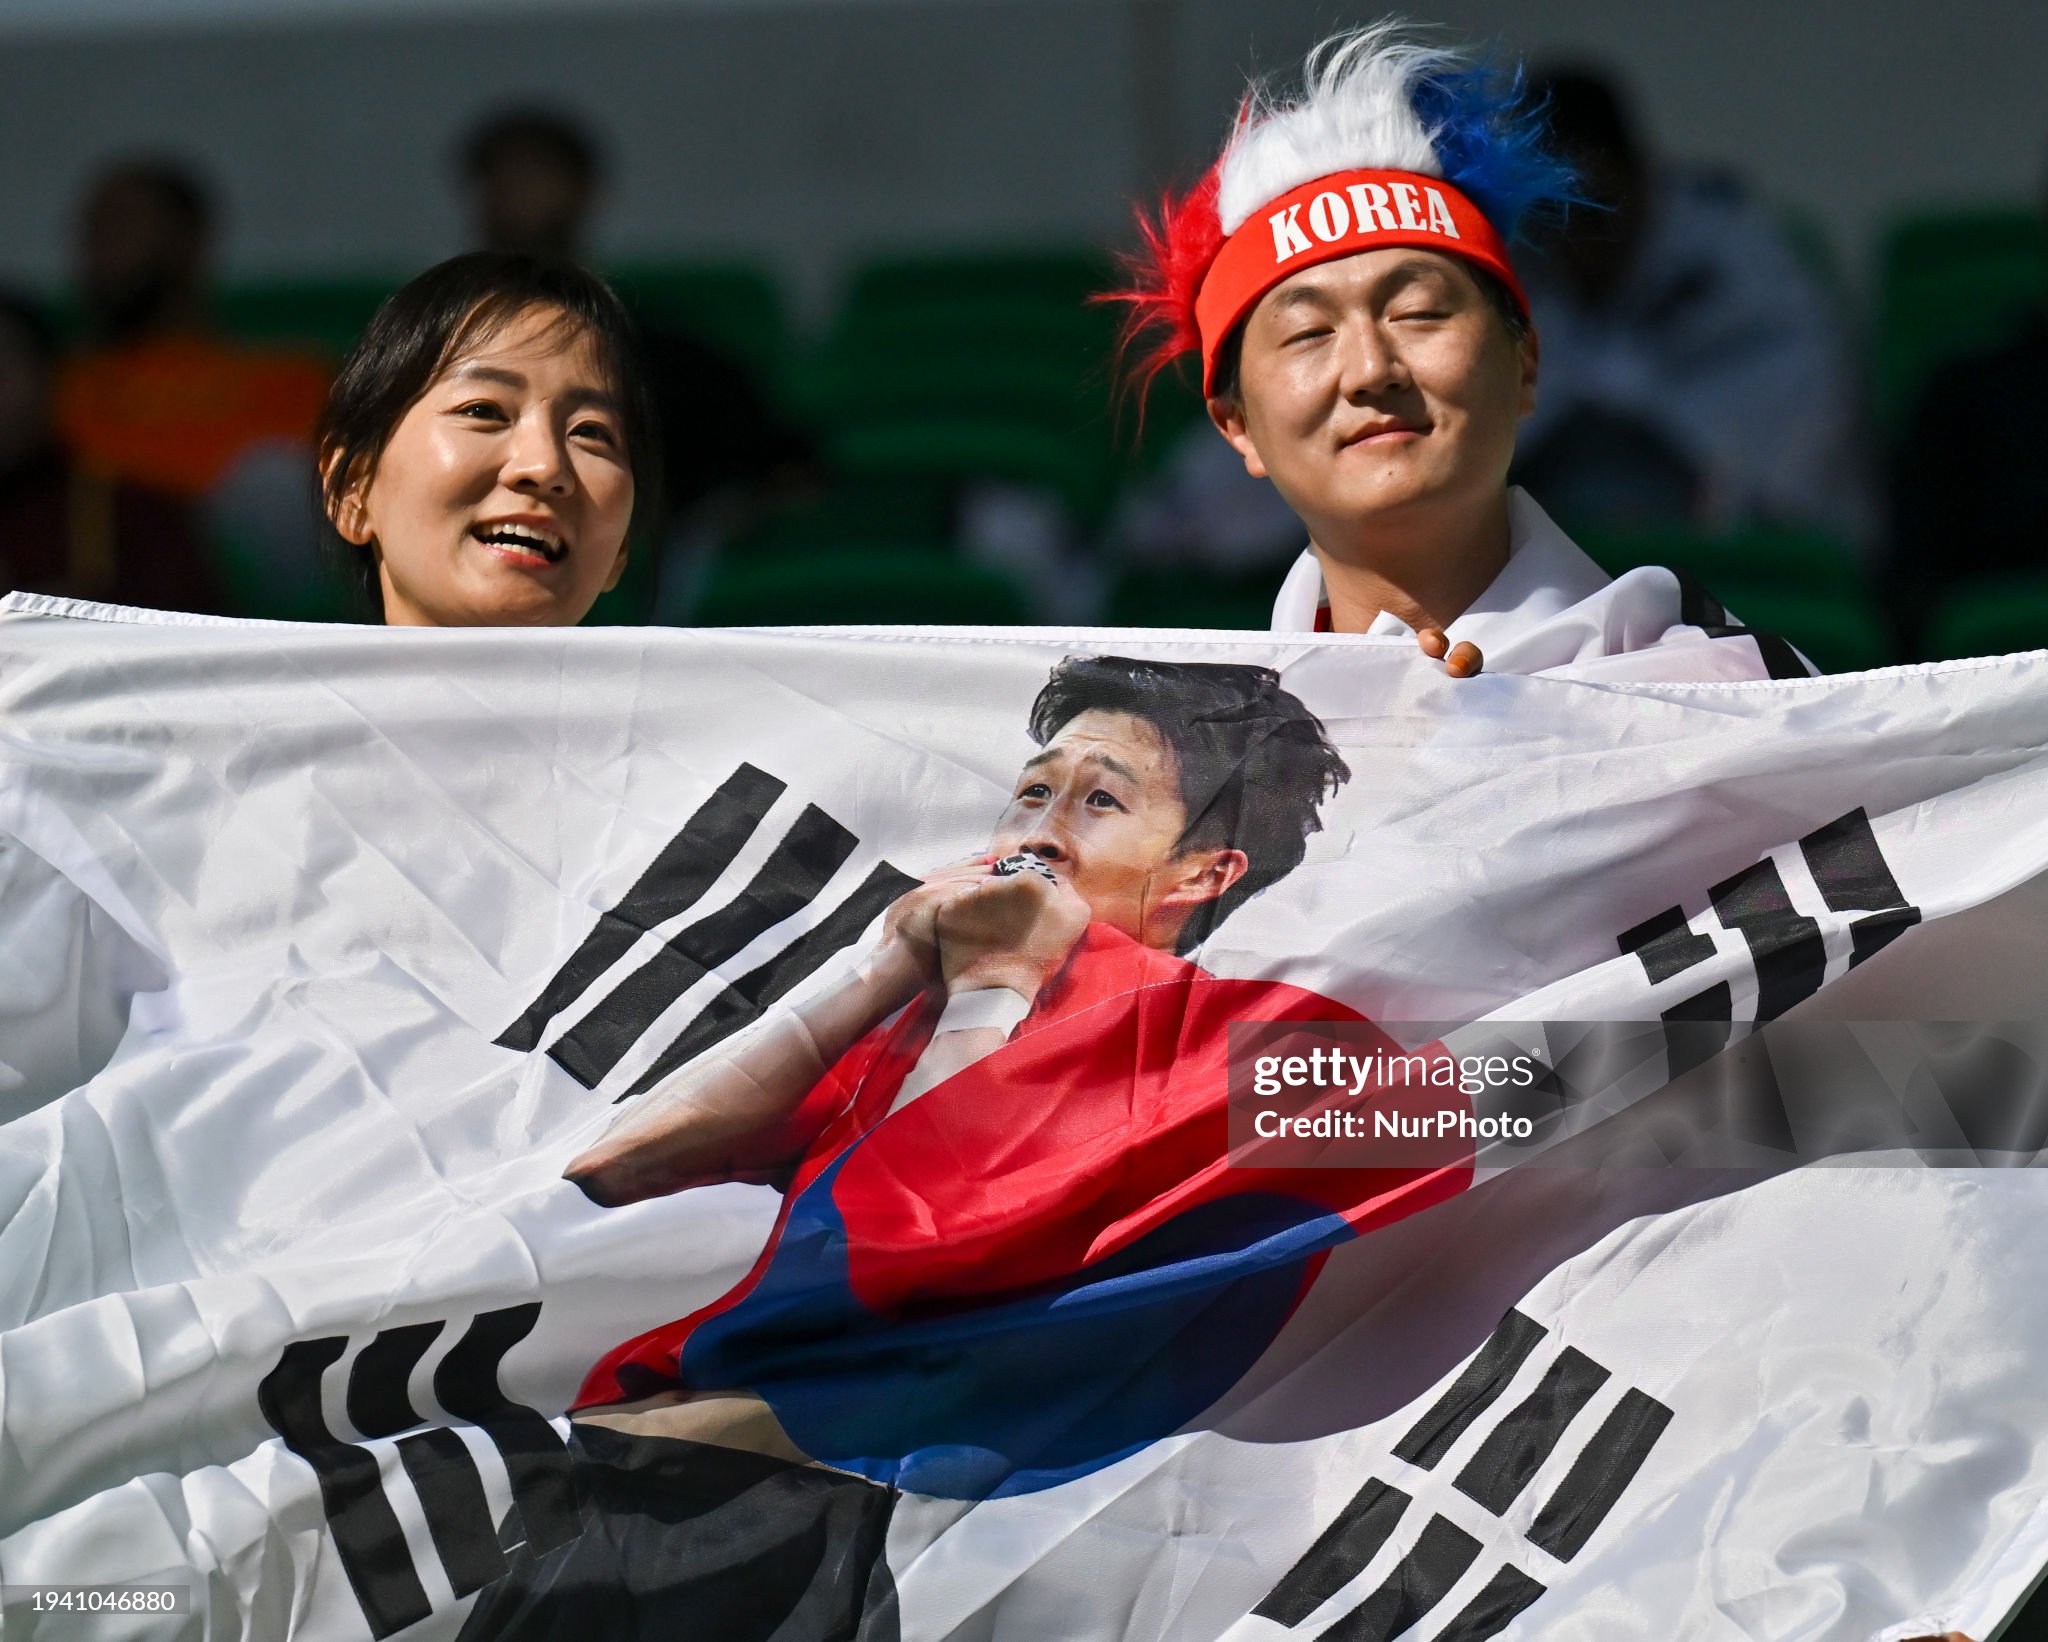 gettyimages-1941046880-2048x2048.jpg